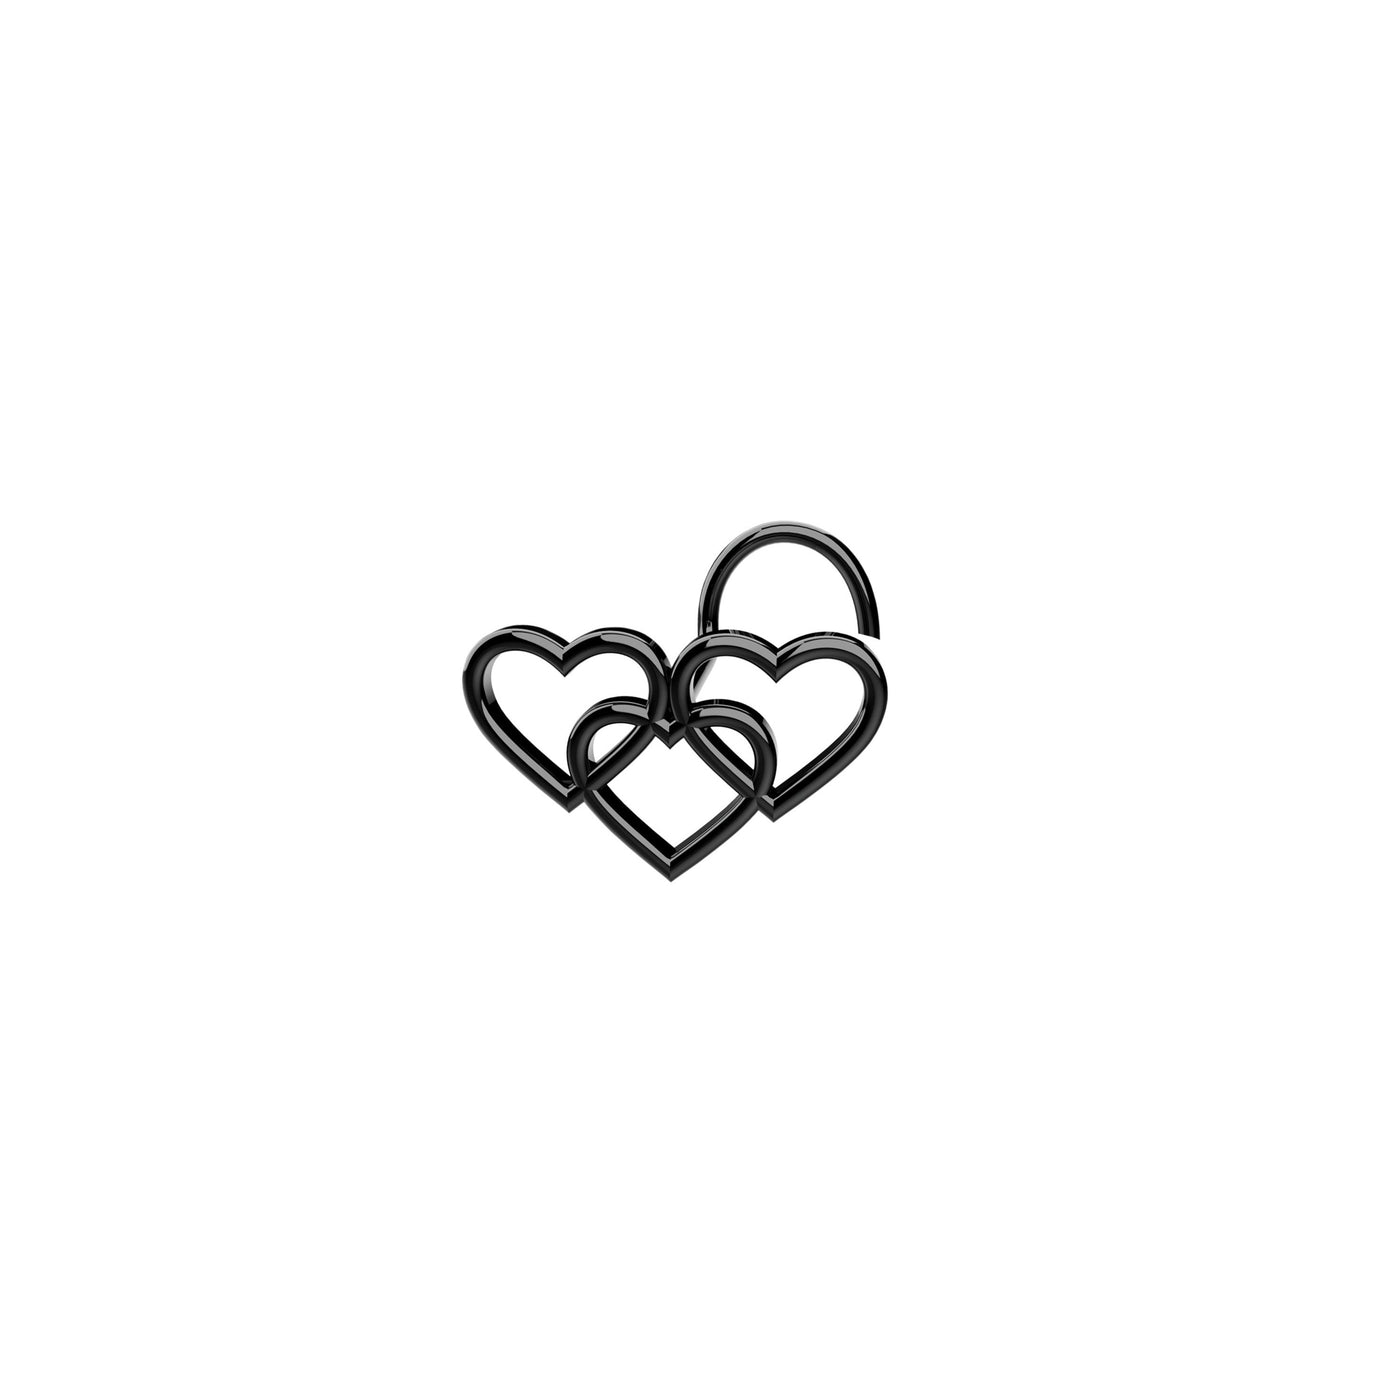 Solid 925 Silver Metal Triple Heart Gold Nose Stud